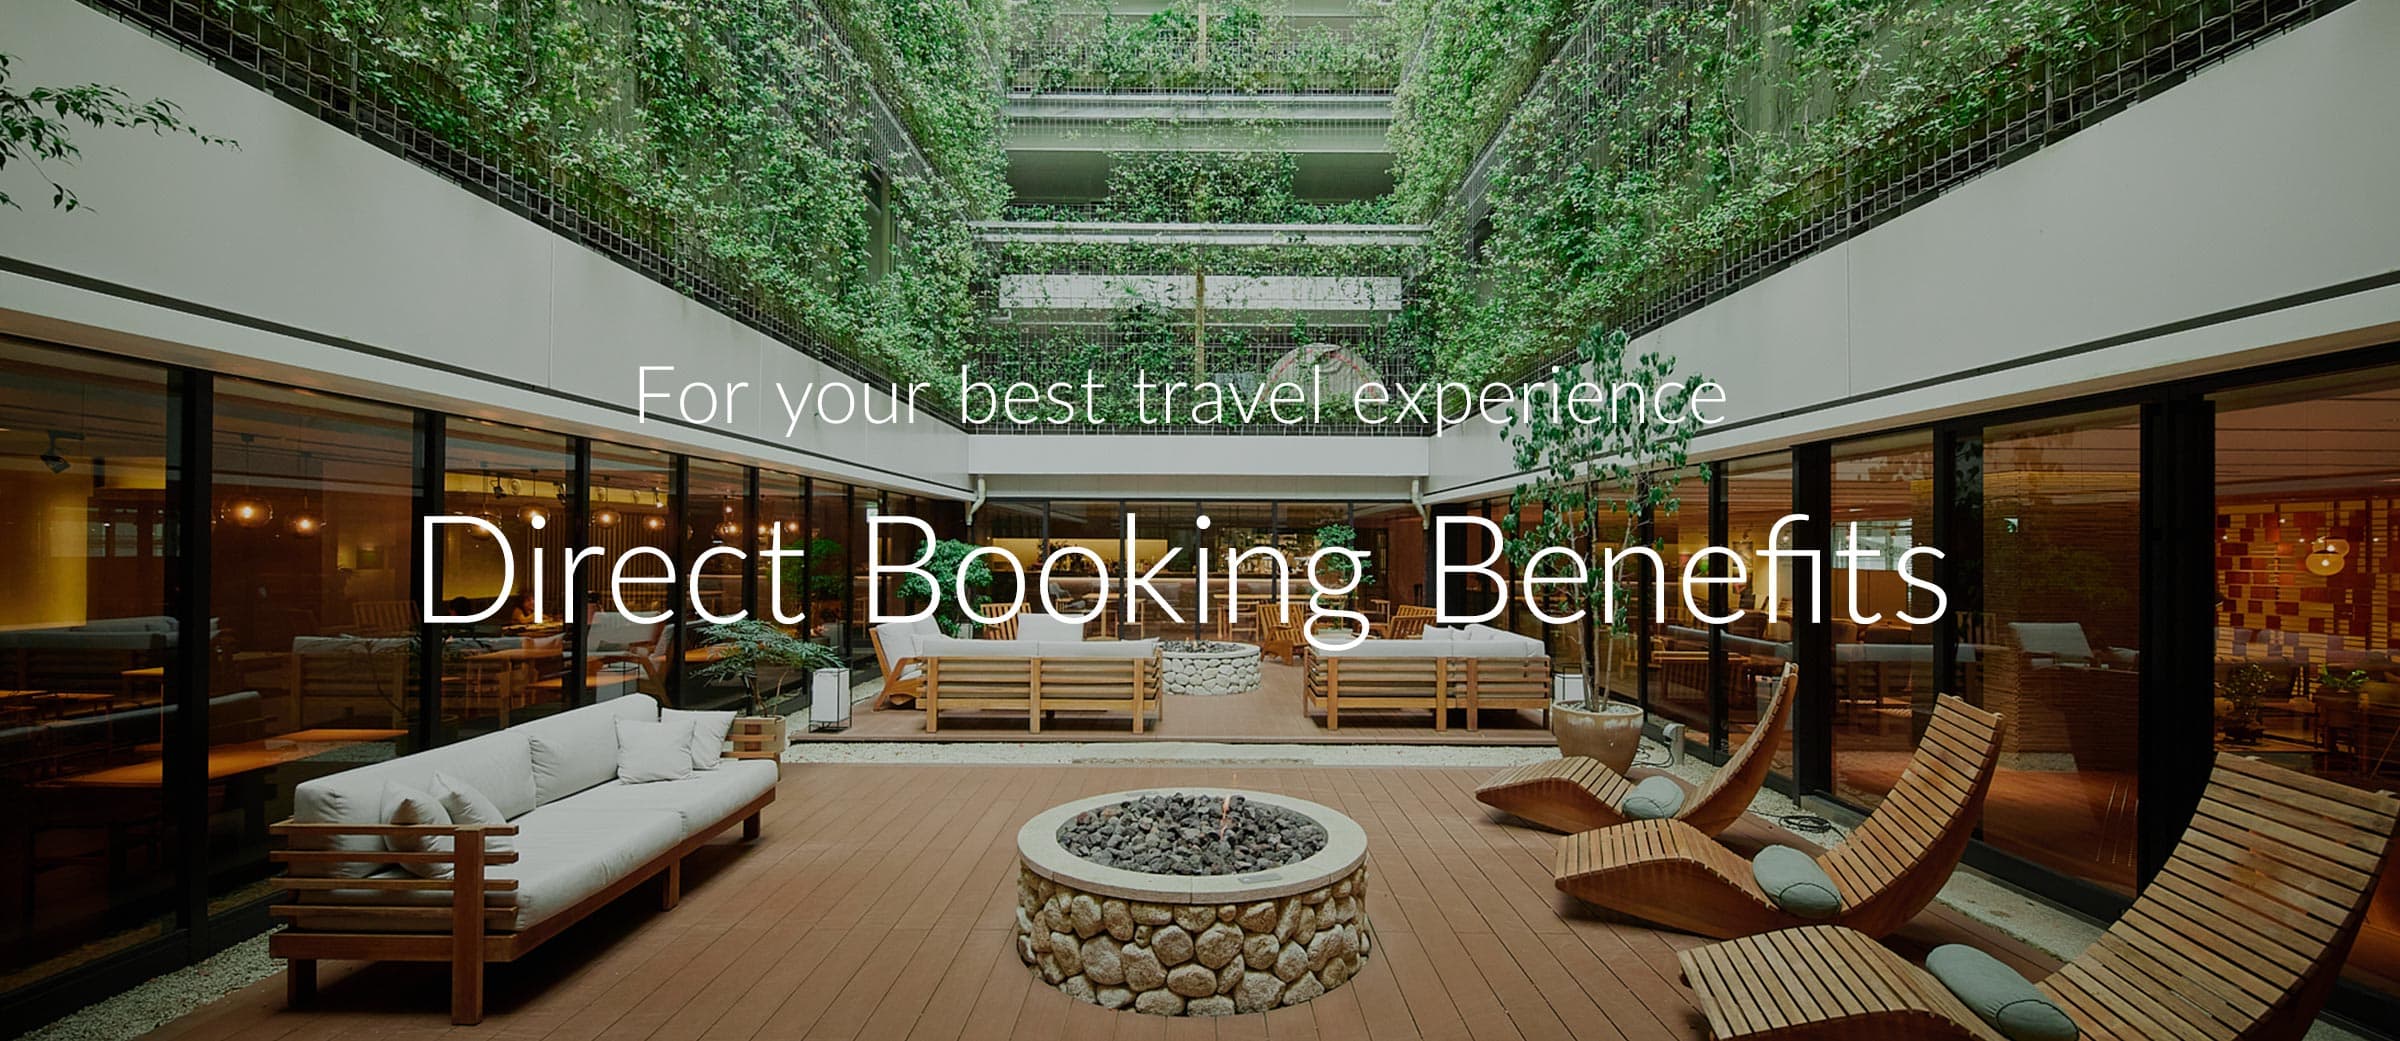 Direct Booking Benefits